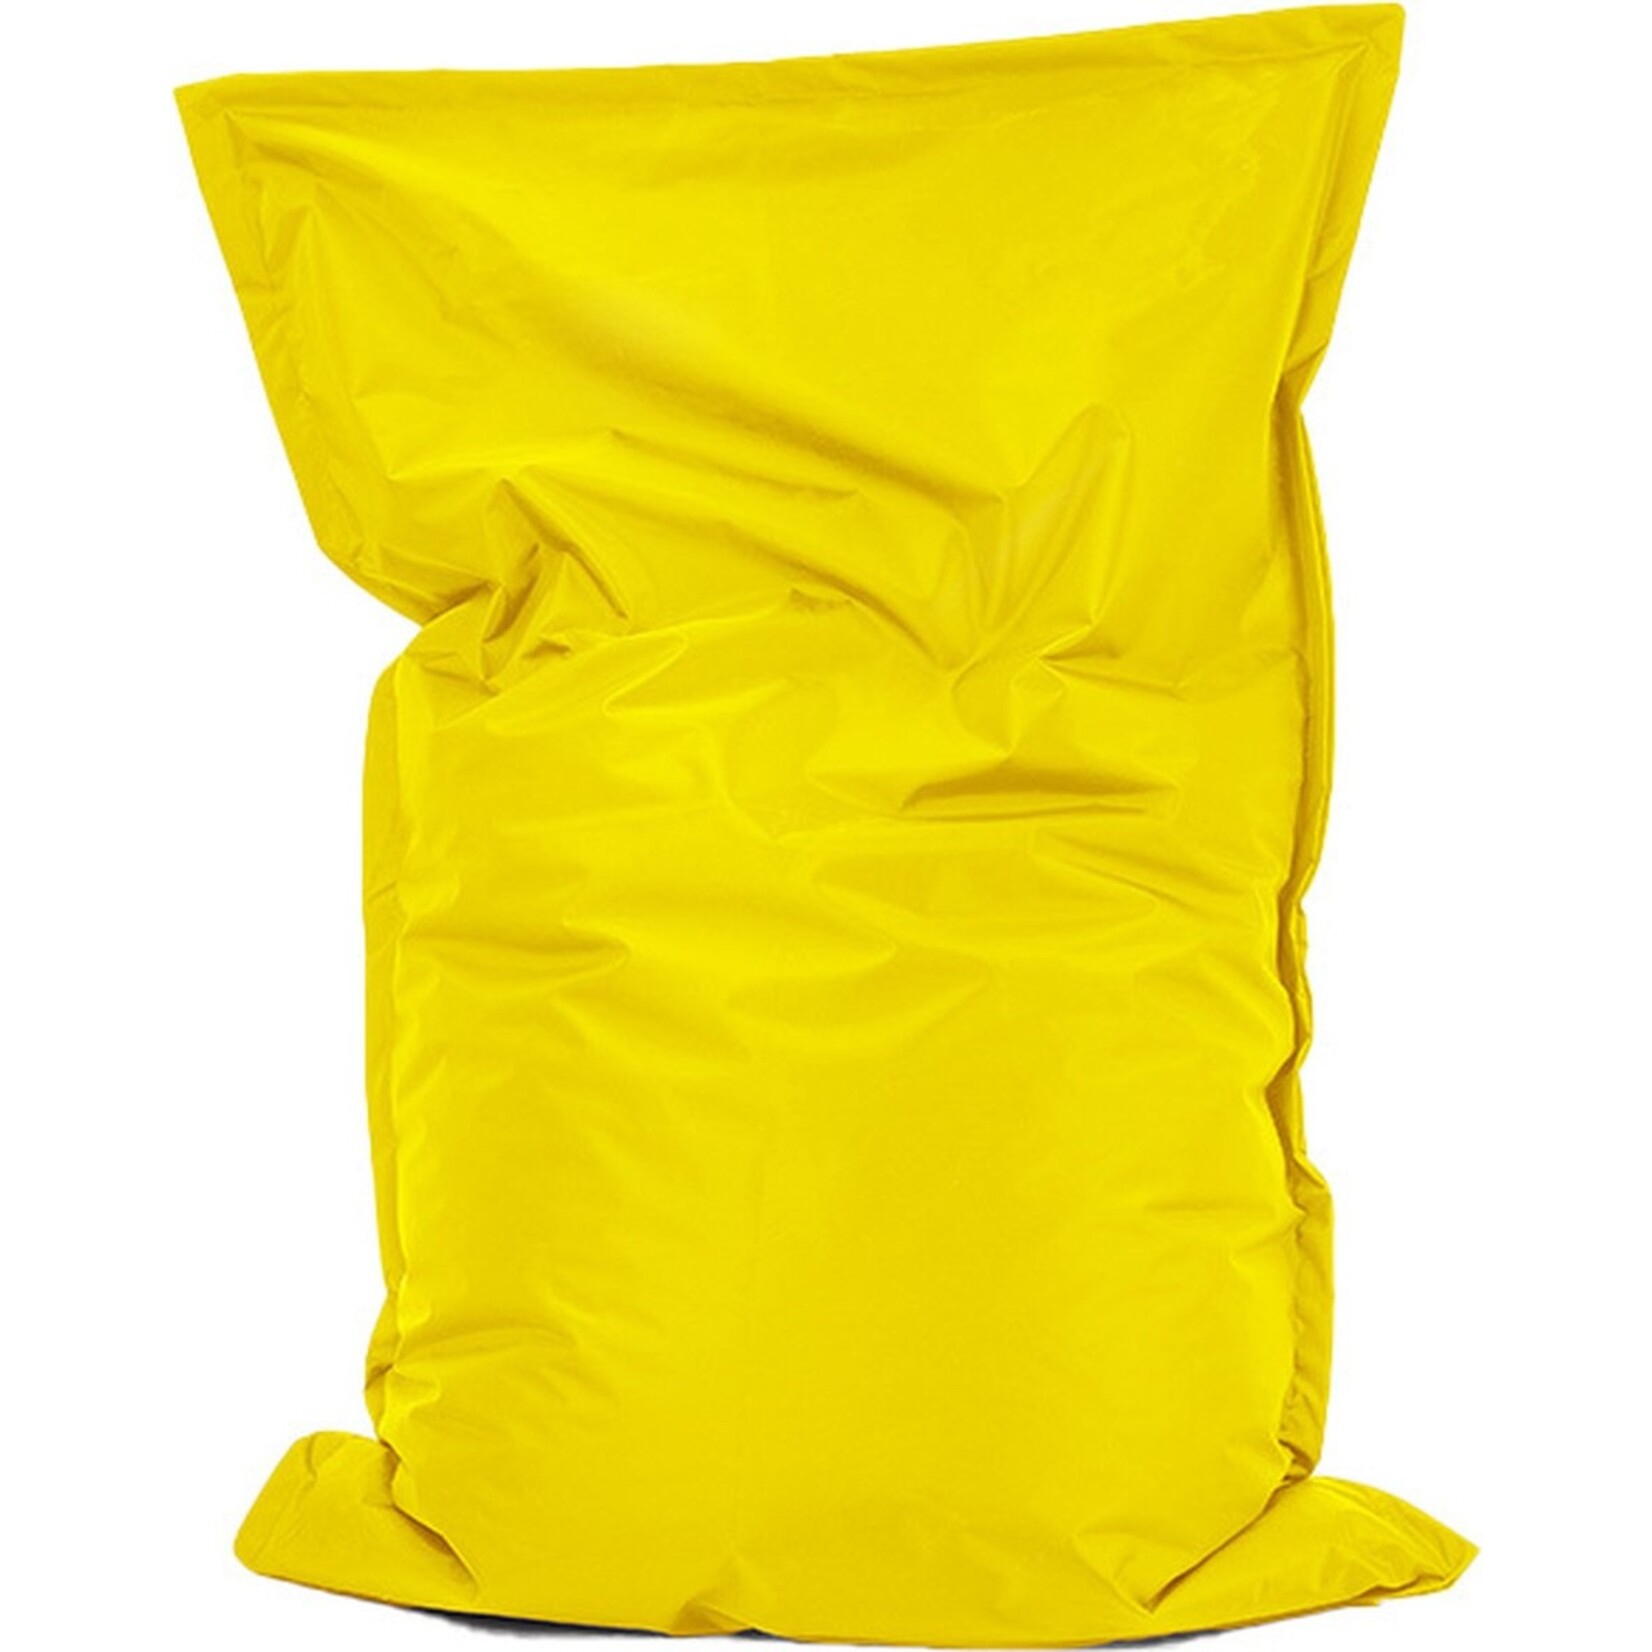 Bobbel Home Bobbel Home - Beanbag Bella - Spacious beanbags - Cushion - Nylon - 100x150 cm - For Indoor and Outdoor - Yellow